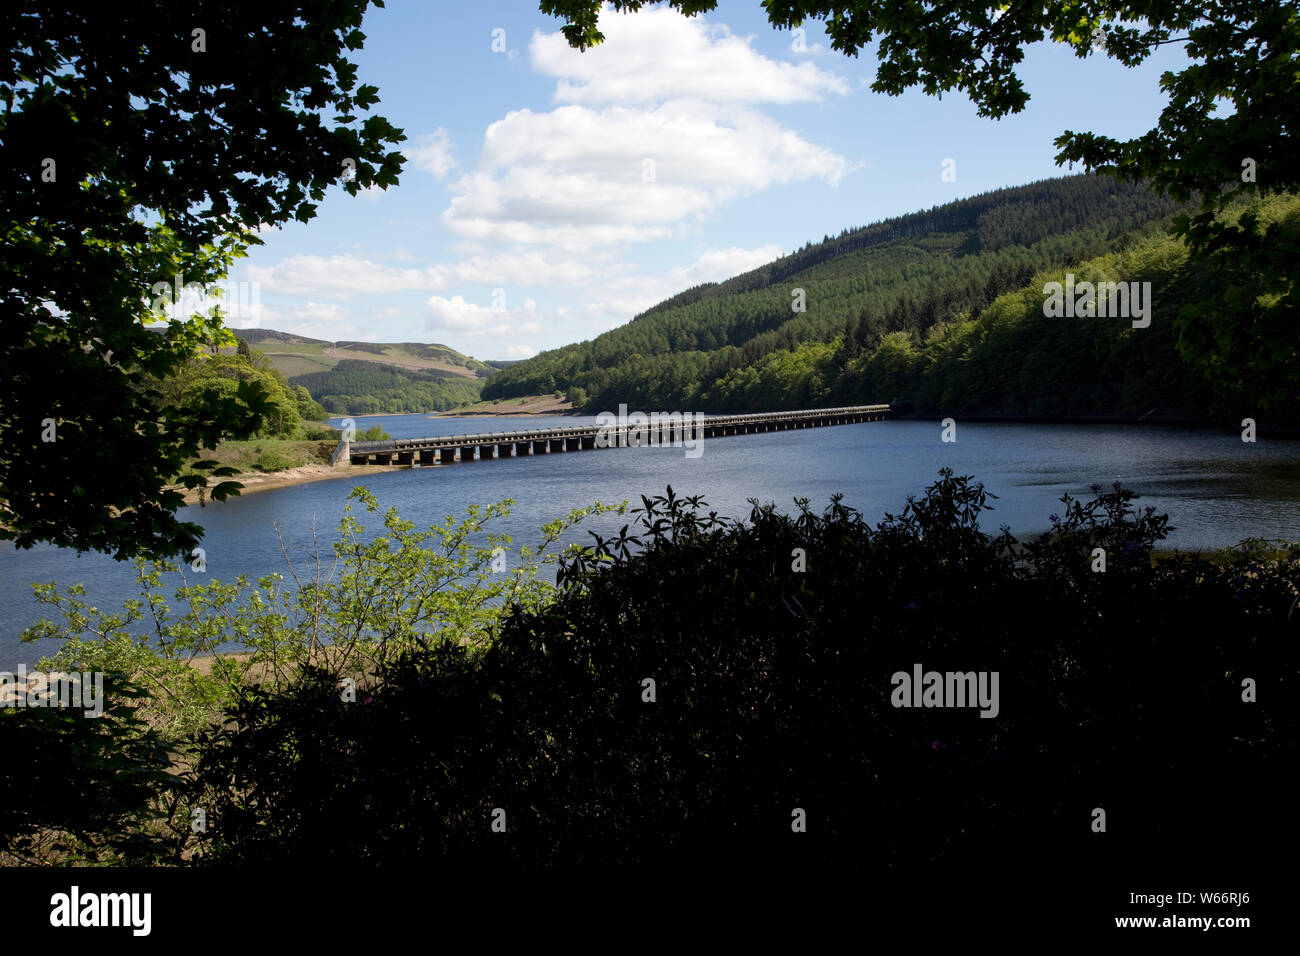 Twin pipe aqueduct in Ladybower Reservoir, the largest (holding 6300 million gallons) of three water storage reservoirs in the Derwent Valley, Peak Di Stock Photo